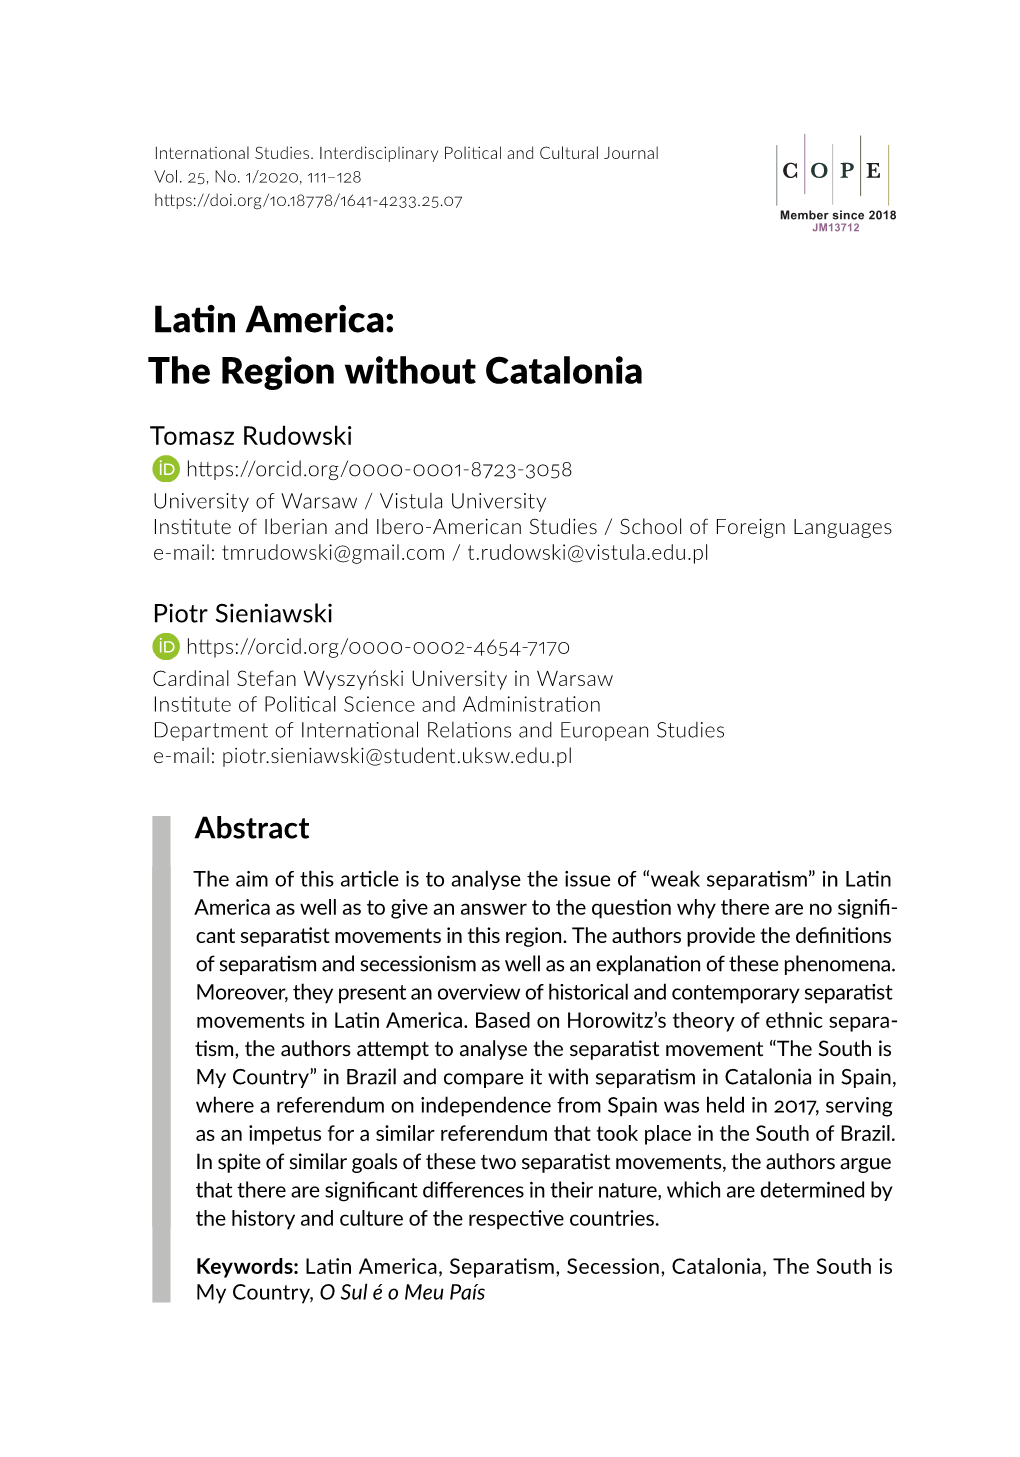 Latin America: the Region Without Catalonia